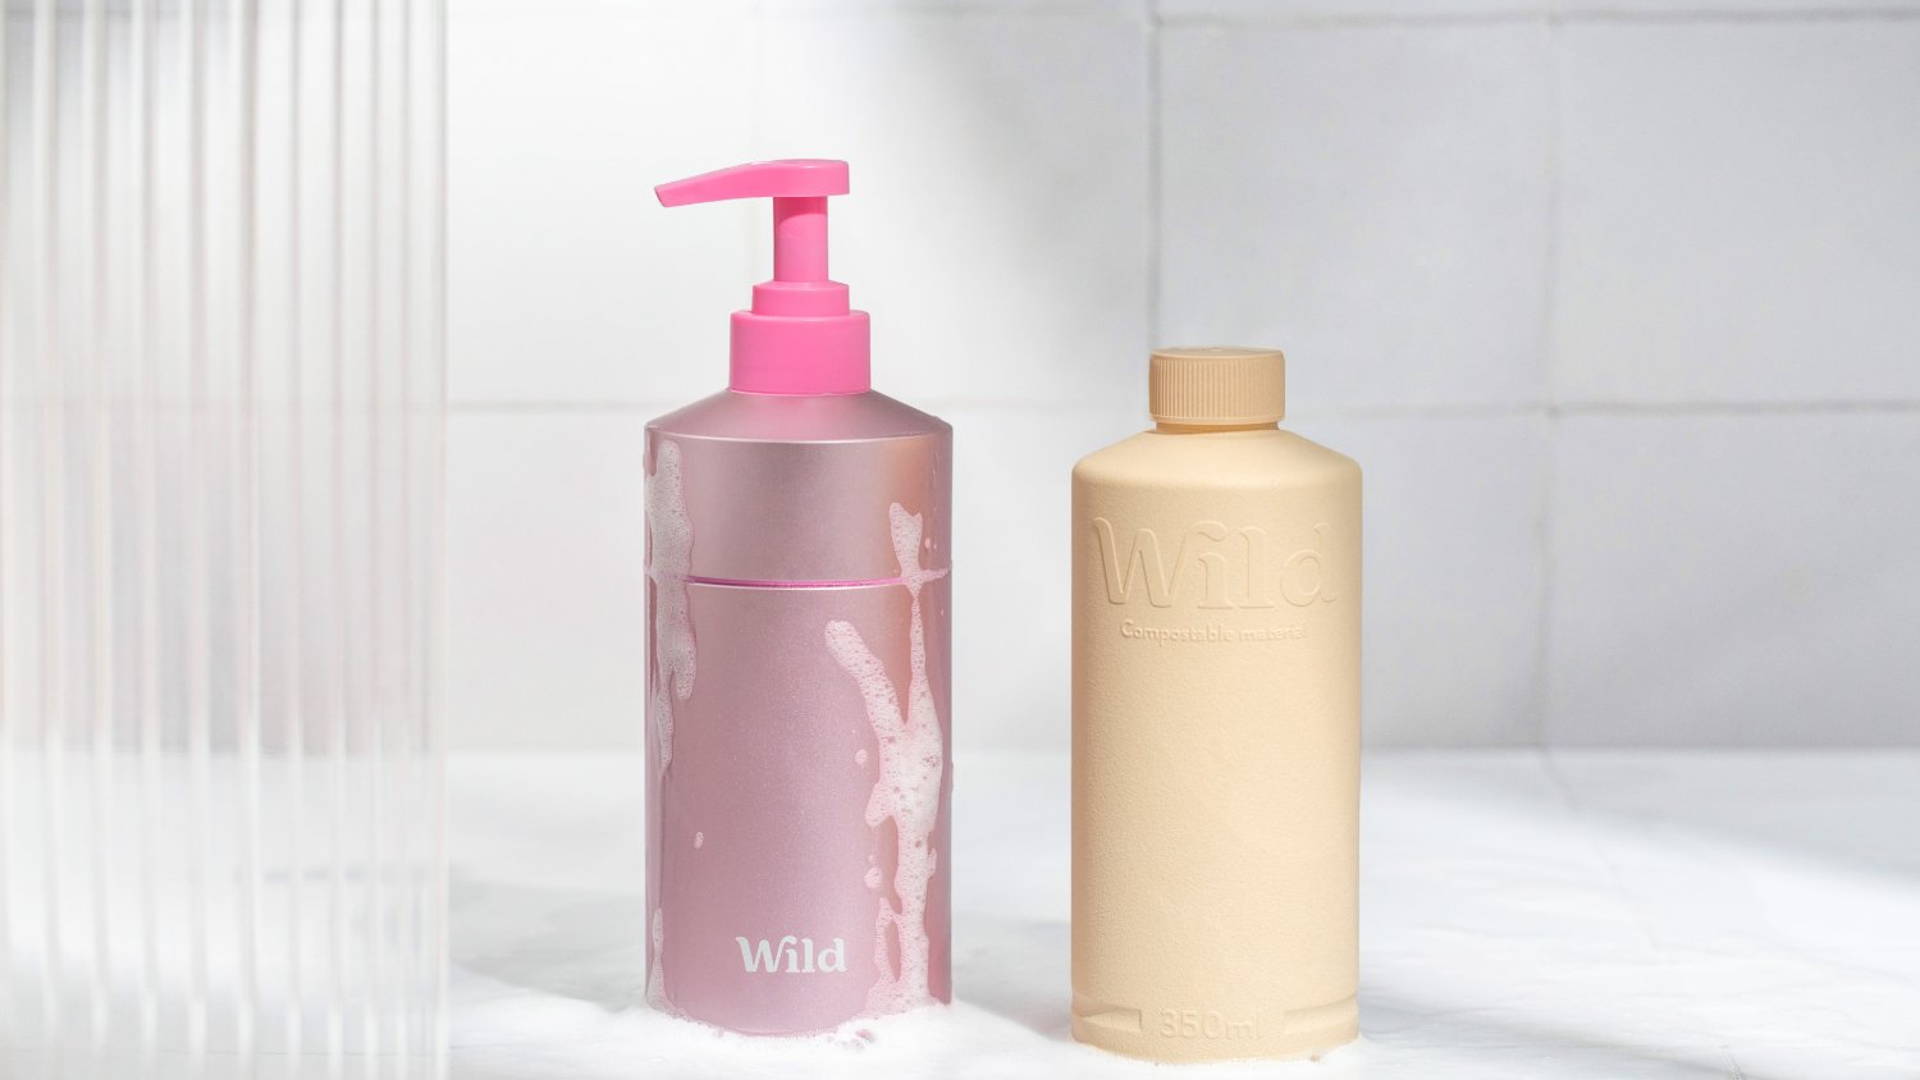 Featured image for Wild Announces Refillable Shower Gel Dispenser System Designed By Morrama